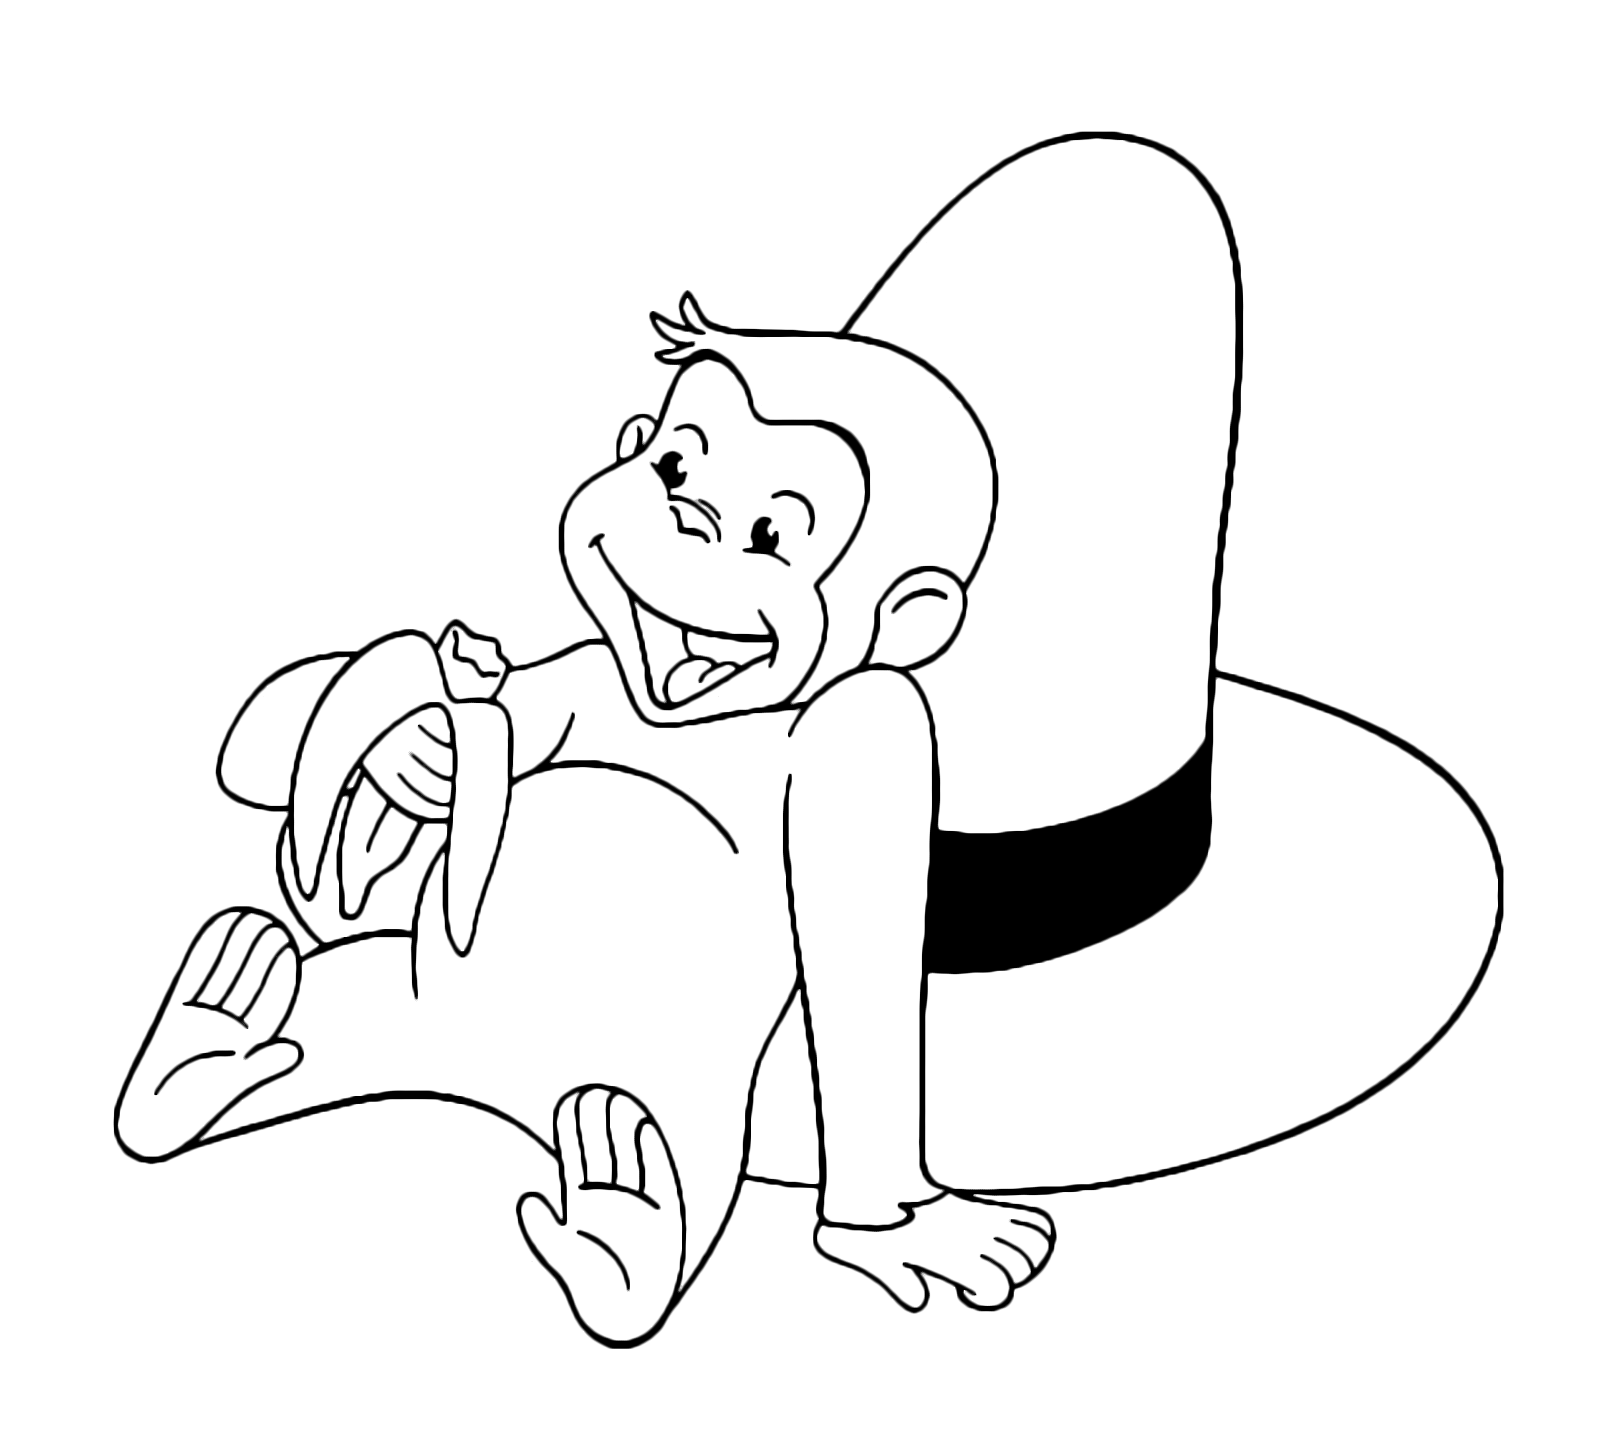 Curious George - George eats a banana leaning on Ted hat